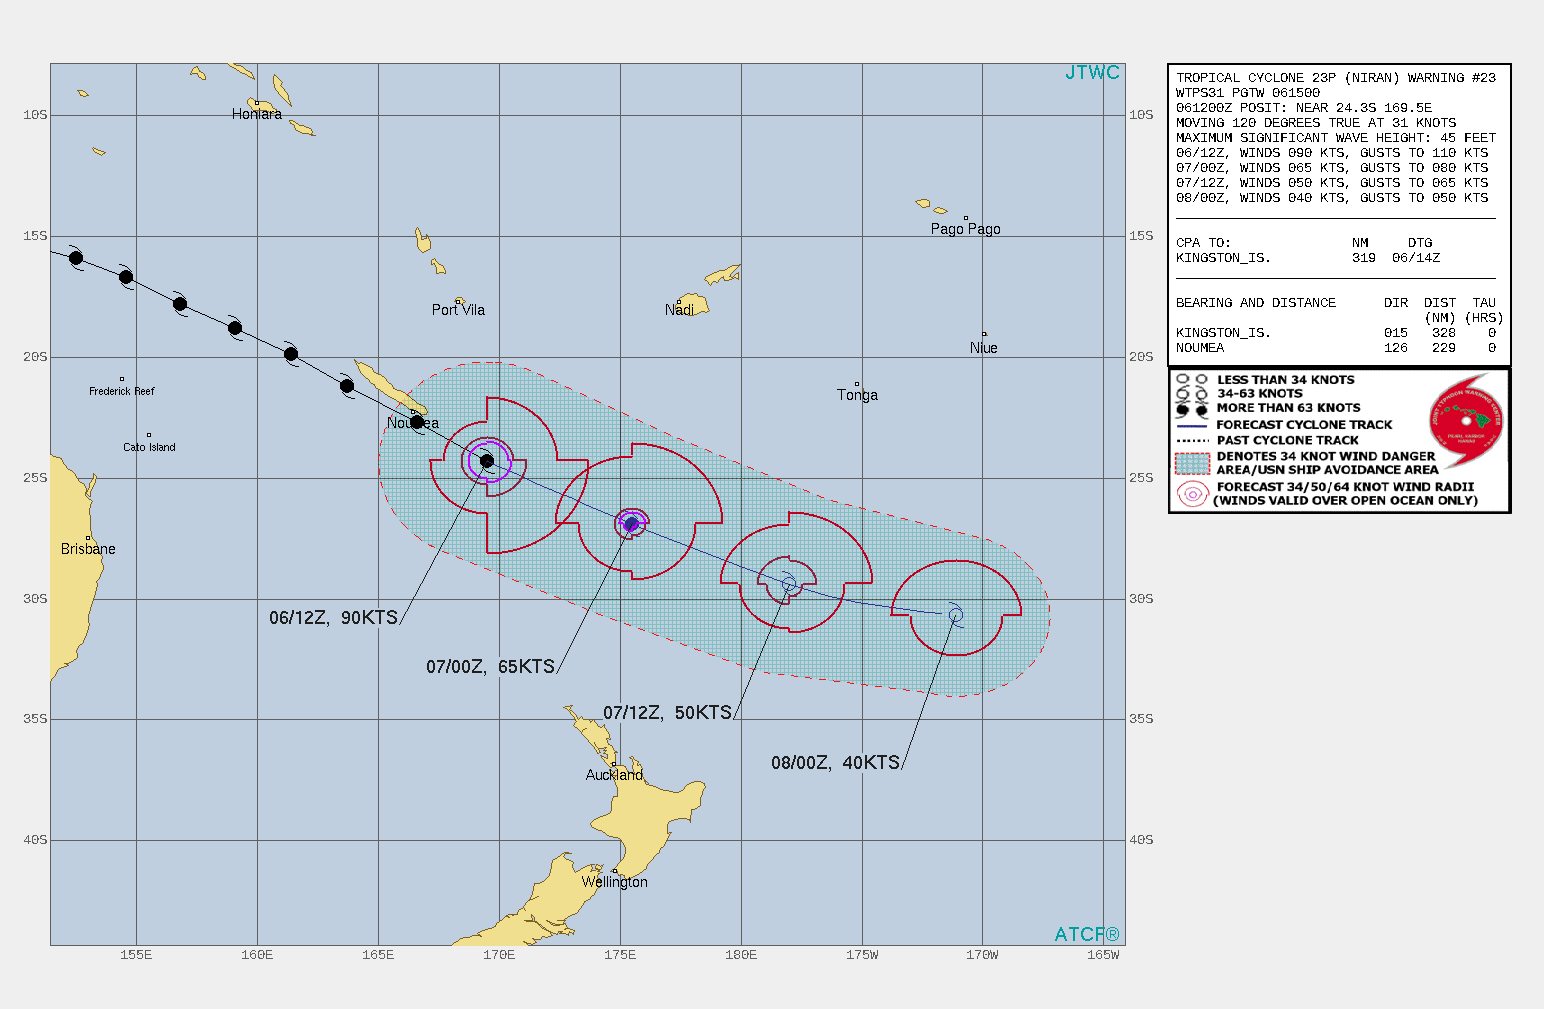 23P(NIRAN). WARNING 23 ISSUED AT 06/15UTC. UPPER LEVEL ANALYSIS INDICATES ROBUST POLEWARD OUTFLOW THAT IS OFFSET BY STRONG  (30KTS+) VERTICAL WIND SHEAR. SEA SURFACE TEMPERATURES (SSTS) HAVE  ALSO DROPPED TO 26C. THE CYCLONE WILL CONTINUE TO ACCELERATE  SOUTHEASTWARD ALONG THE SOUTHWEST PERIPHERY OF THE DEEP LAYERED  SUBTROPICAL RIDGE TO THE EAST. THE UNFAVORABLE ENVIRONMENT WILL  SUSTAIN THE RAPID WEAKENING DOWN TO 40KNOTS BY 36H. CONCURRENTLY, TC  NIRAN WILL BEGIN SUBTROPICAL TRANSITION BY 12H AND BY 36H WILL  BECOME A GALE-FORCE SUBTROPICAL LOW, POSSIBLY SOONER.